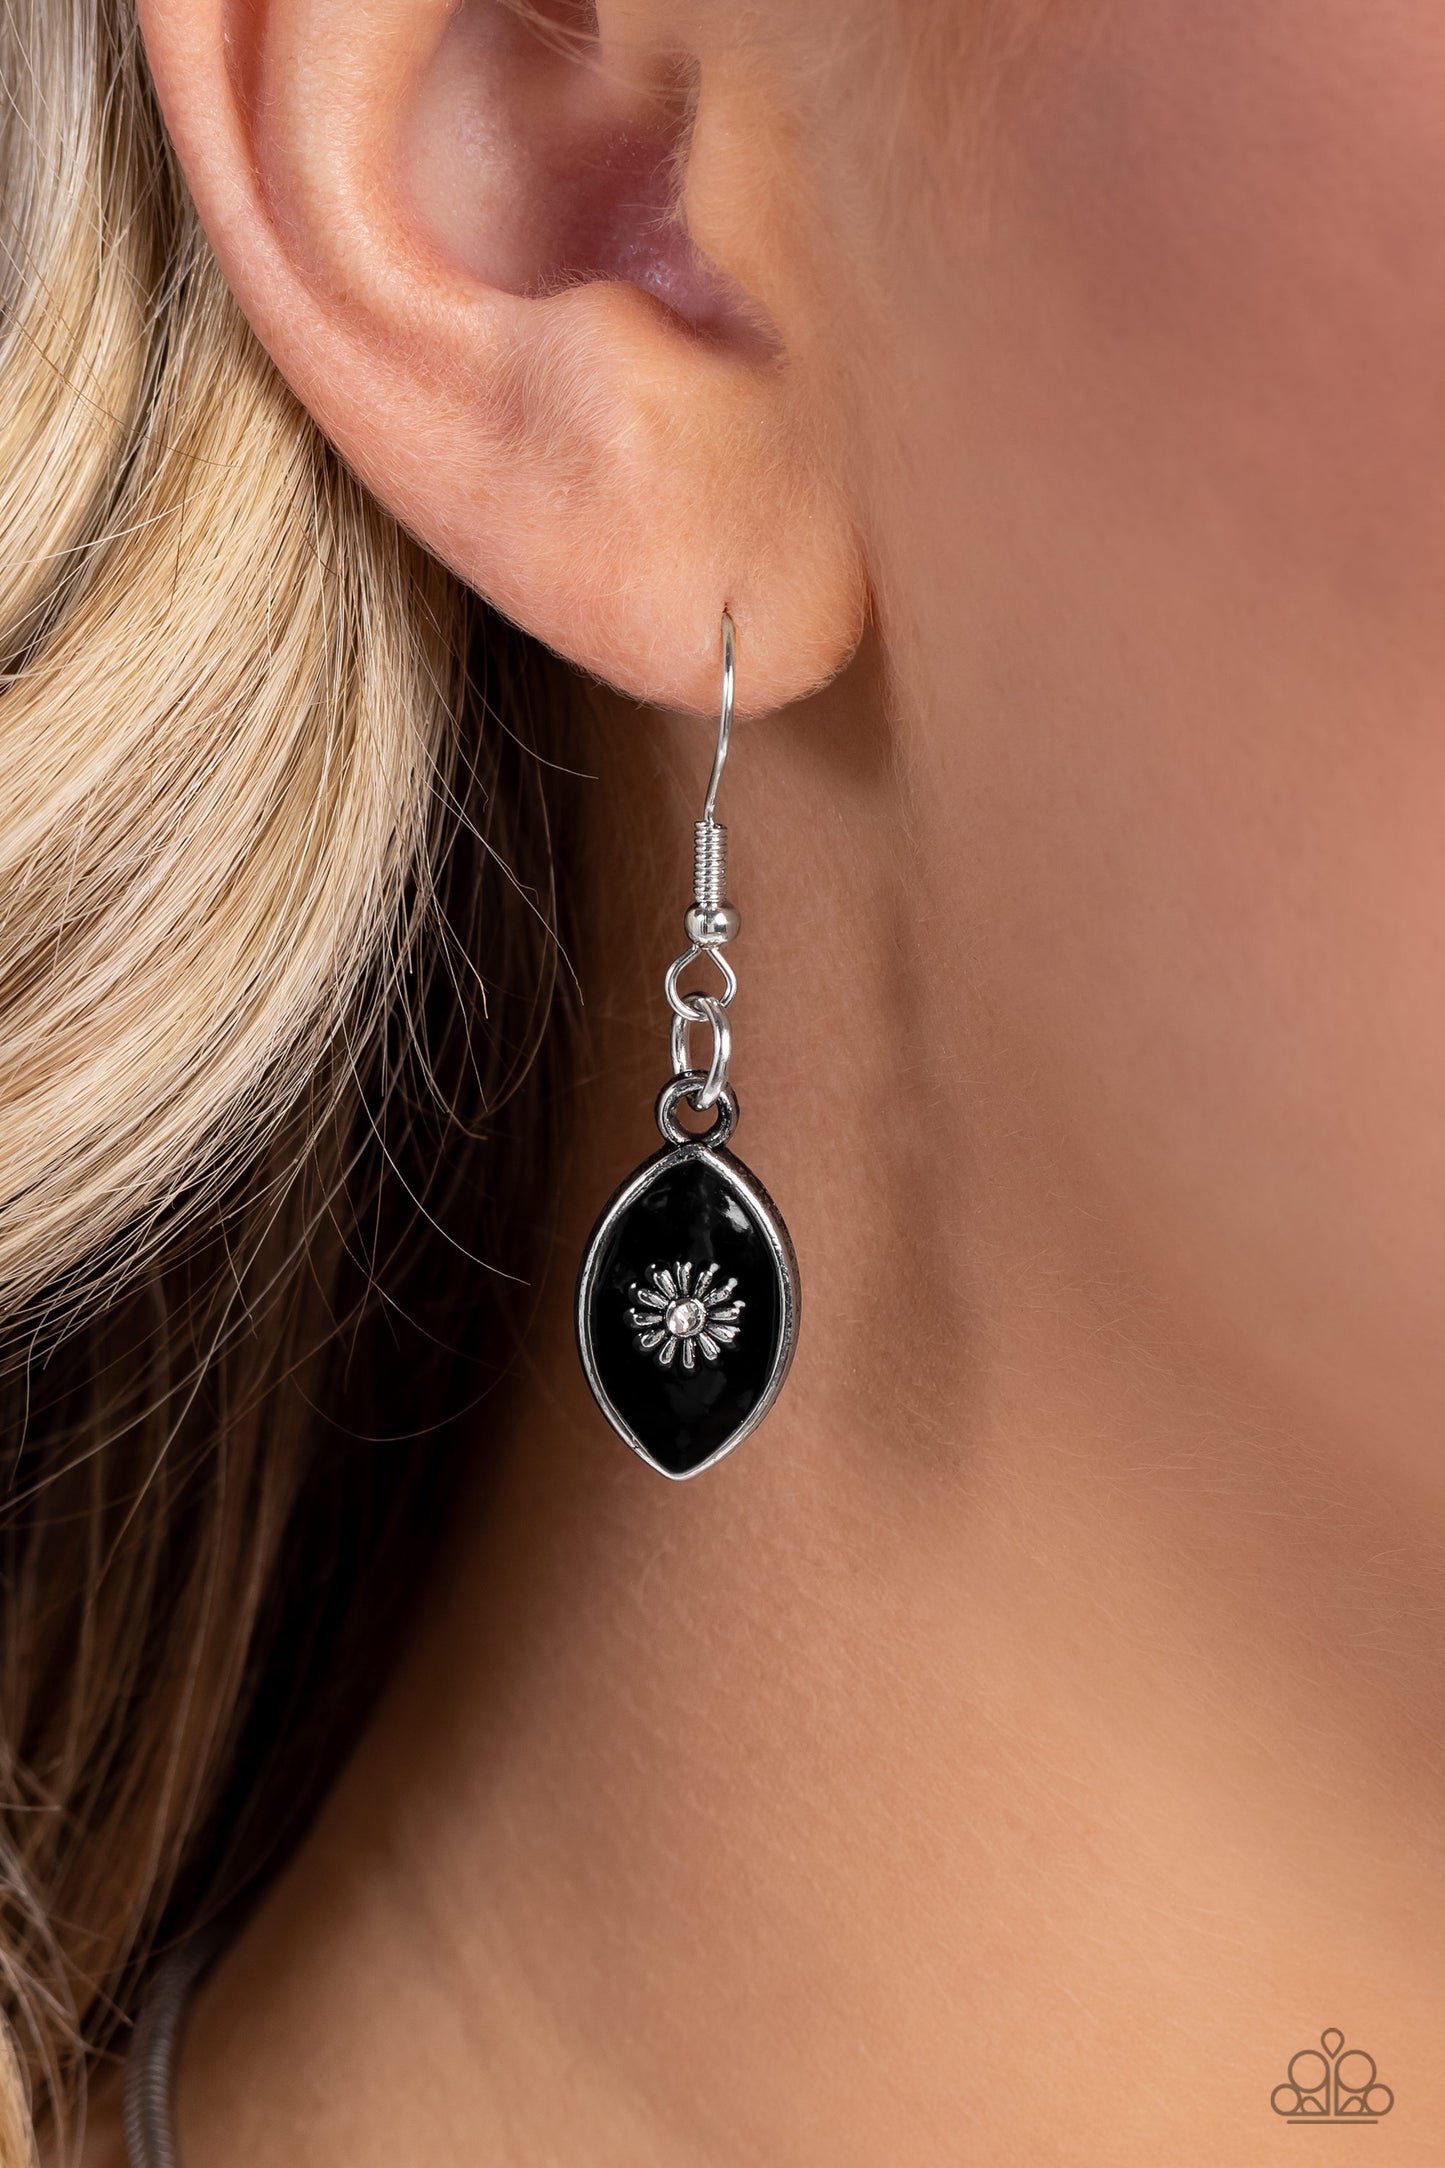 Paparazzi Accessories Pressed Flowers - Black Featuring intense black paint, a collection of silver marquise-shaped frames gradually increase in size as they taper below the collar in a timeless fashion on a silver snake chain. Each frame is embossed with